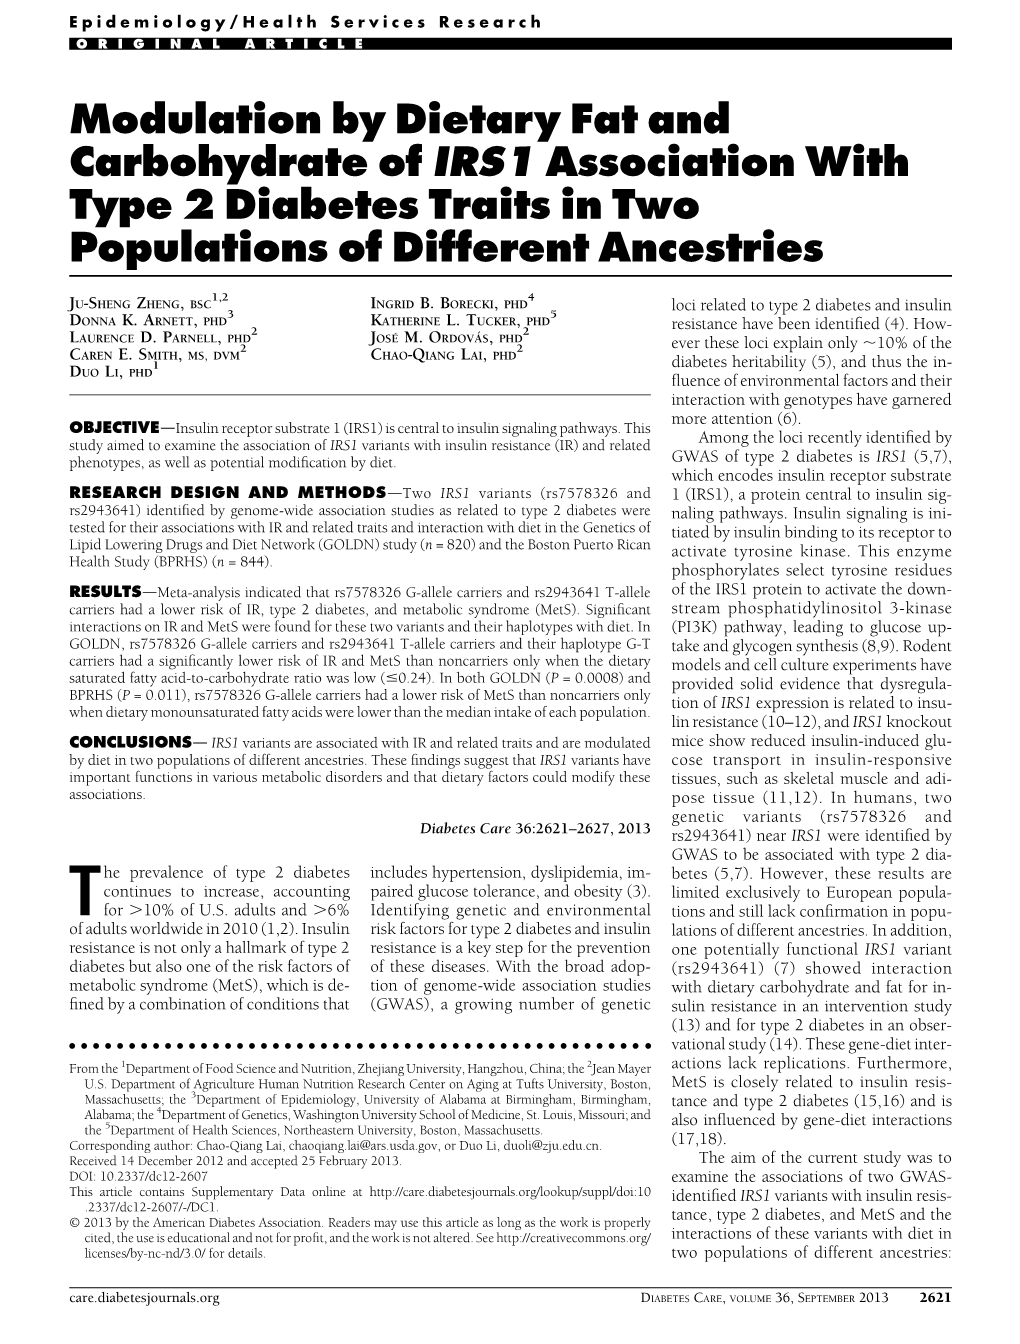 Modulation by Dietary Fat and Carbohydrate of IRS1 Association with Type 2 Diabetes Traits in Two Populations of Different Ancestries